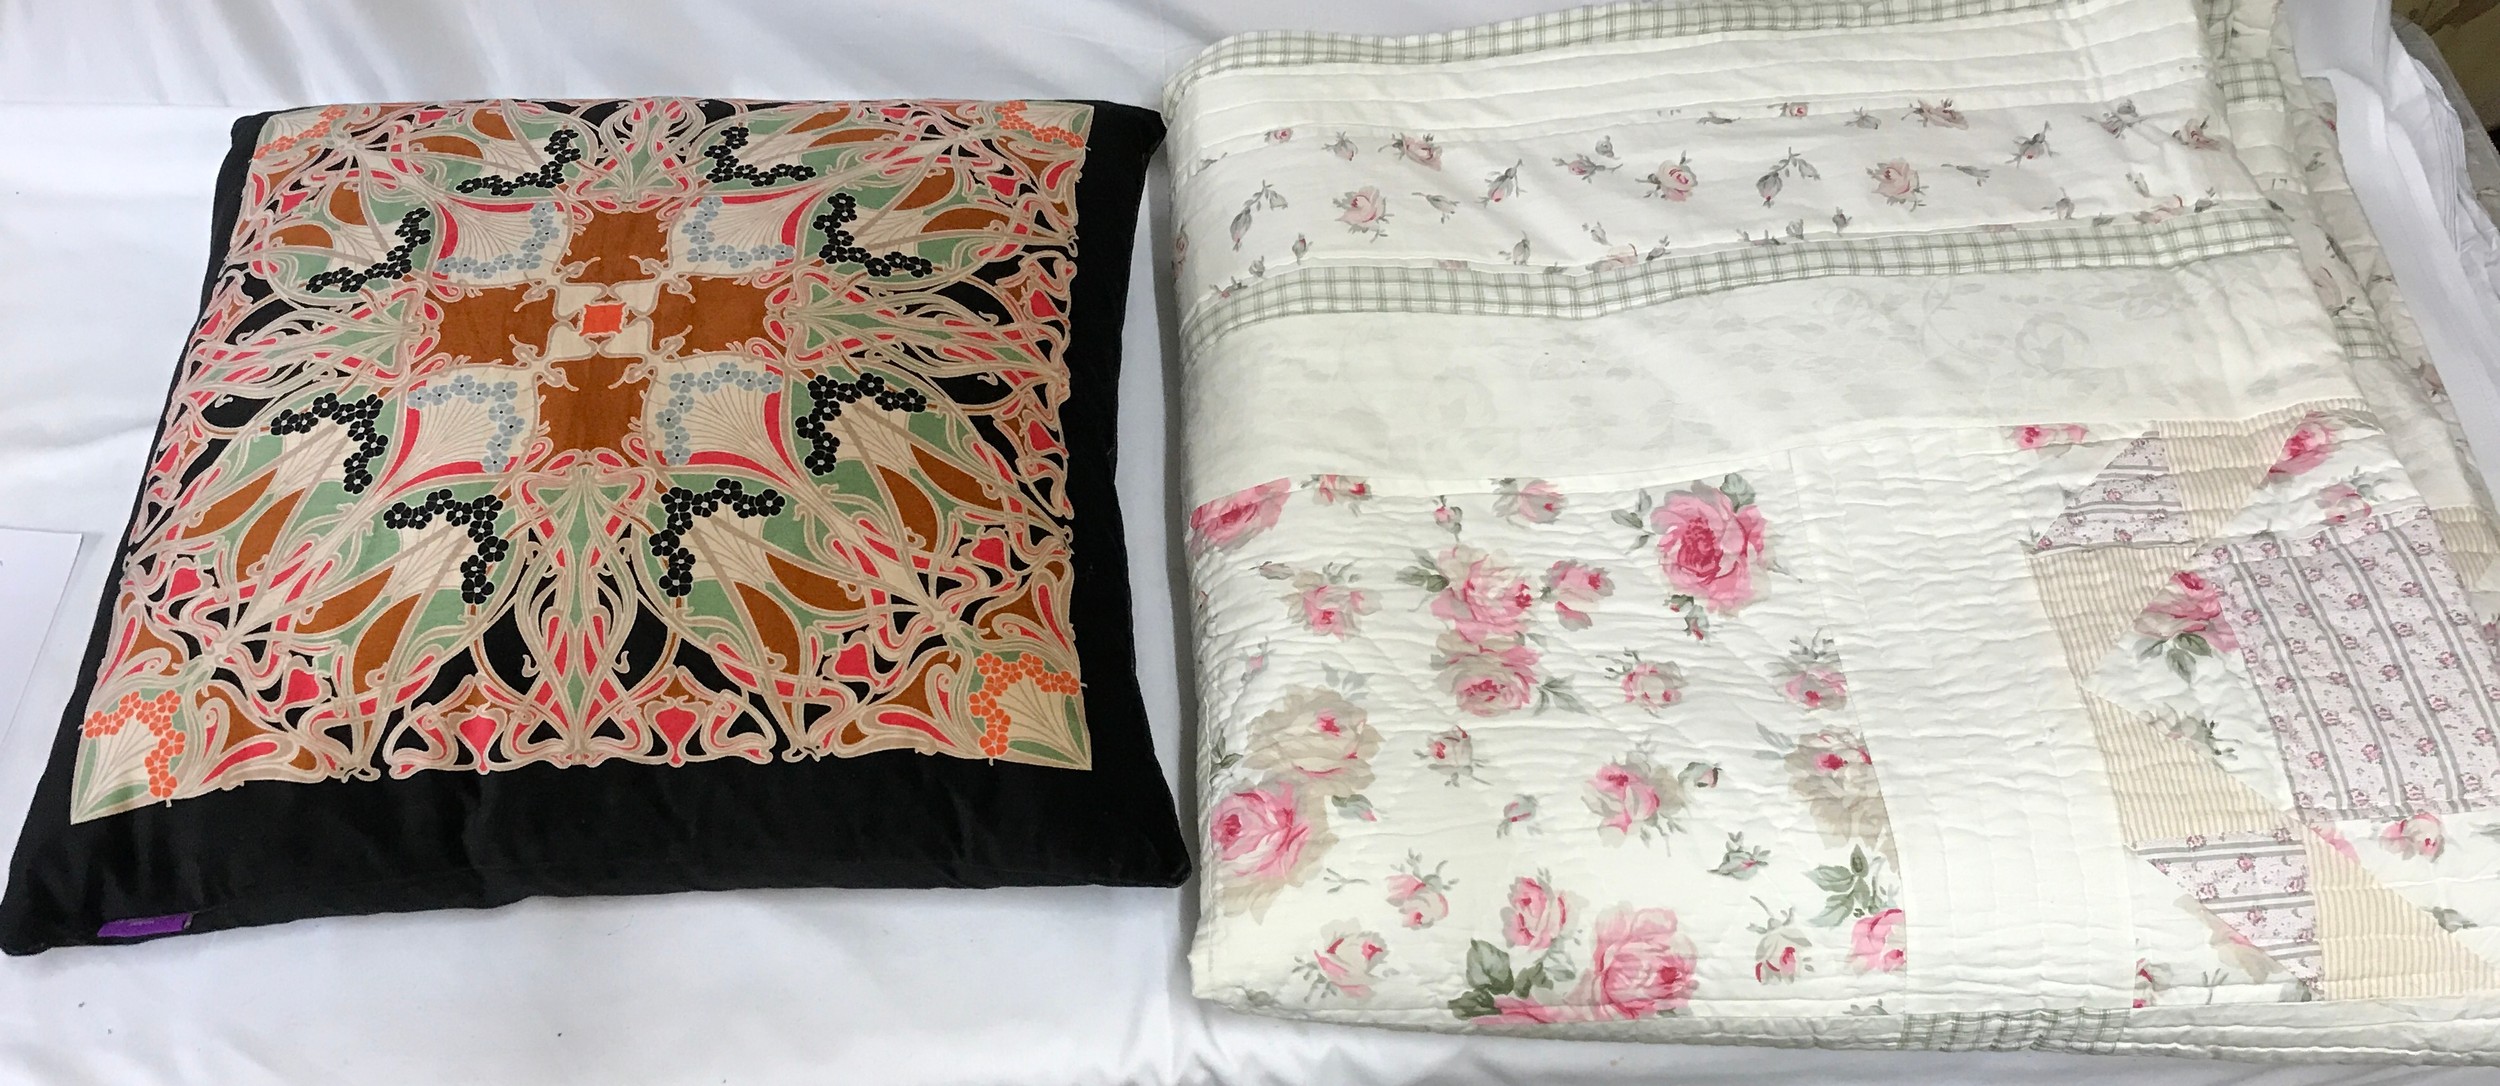 A contemporary part patchwork style quilt with printed patchwork design in pinks and greens approx